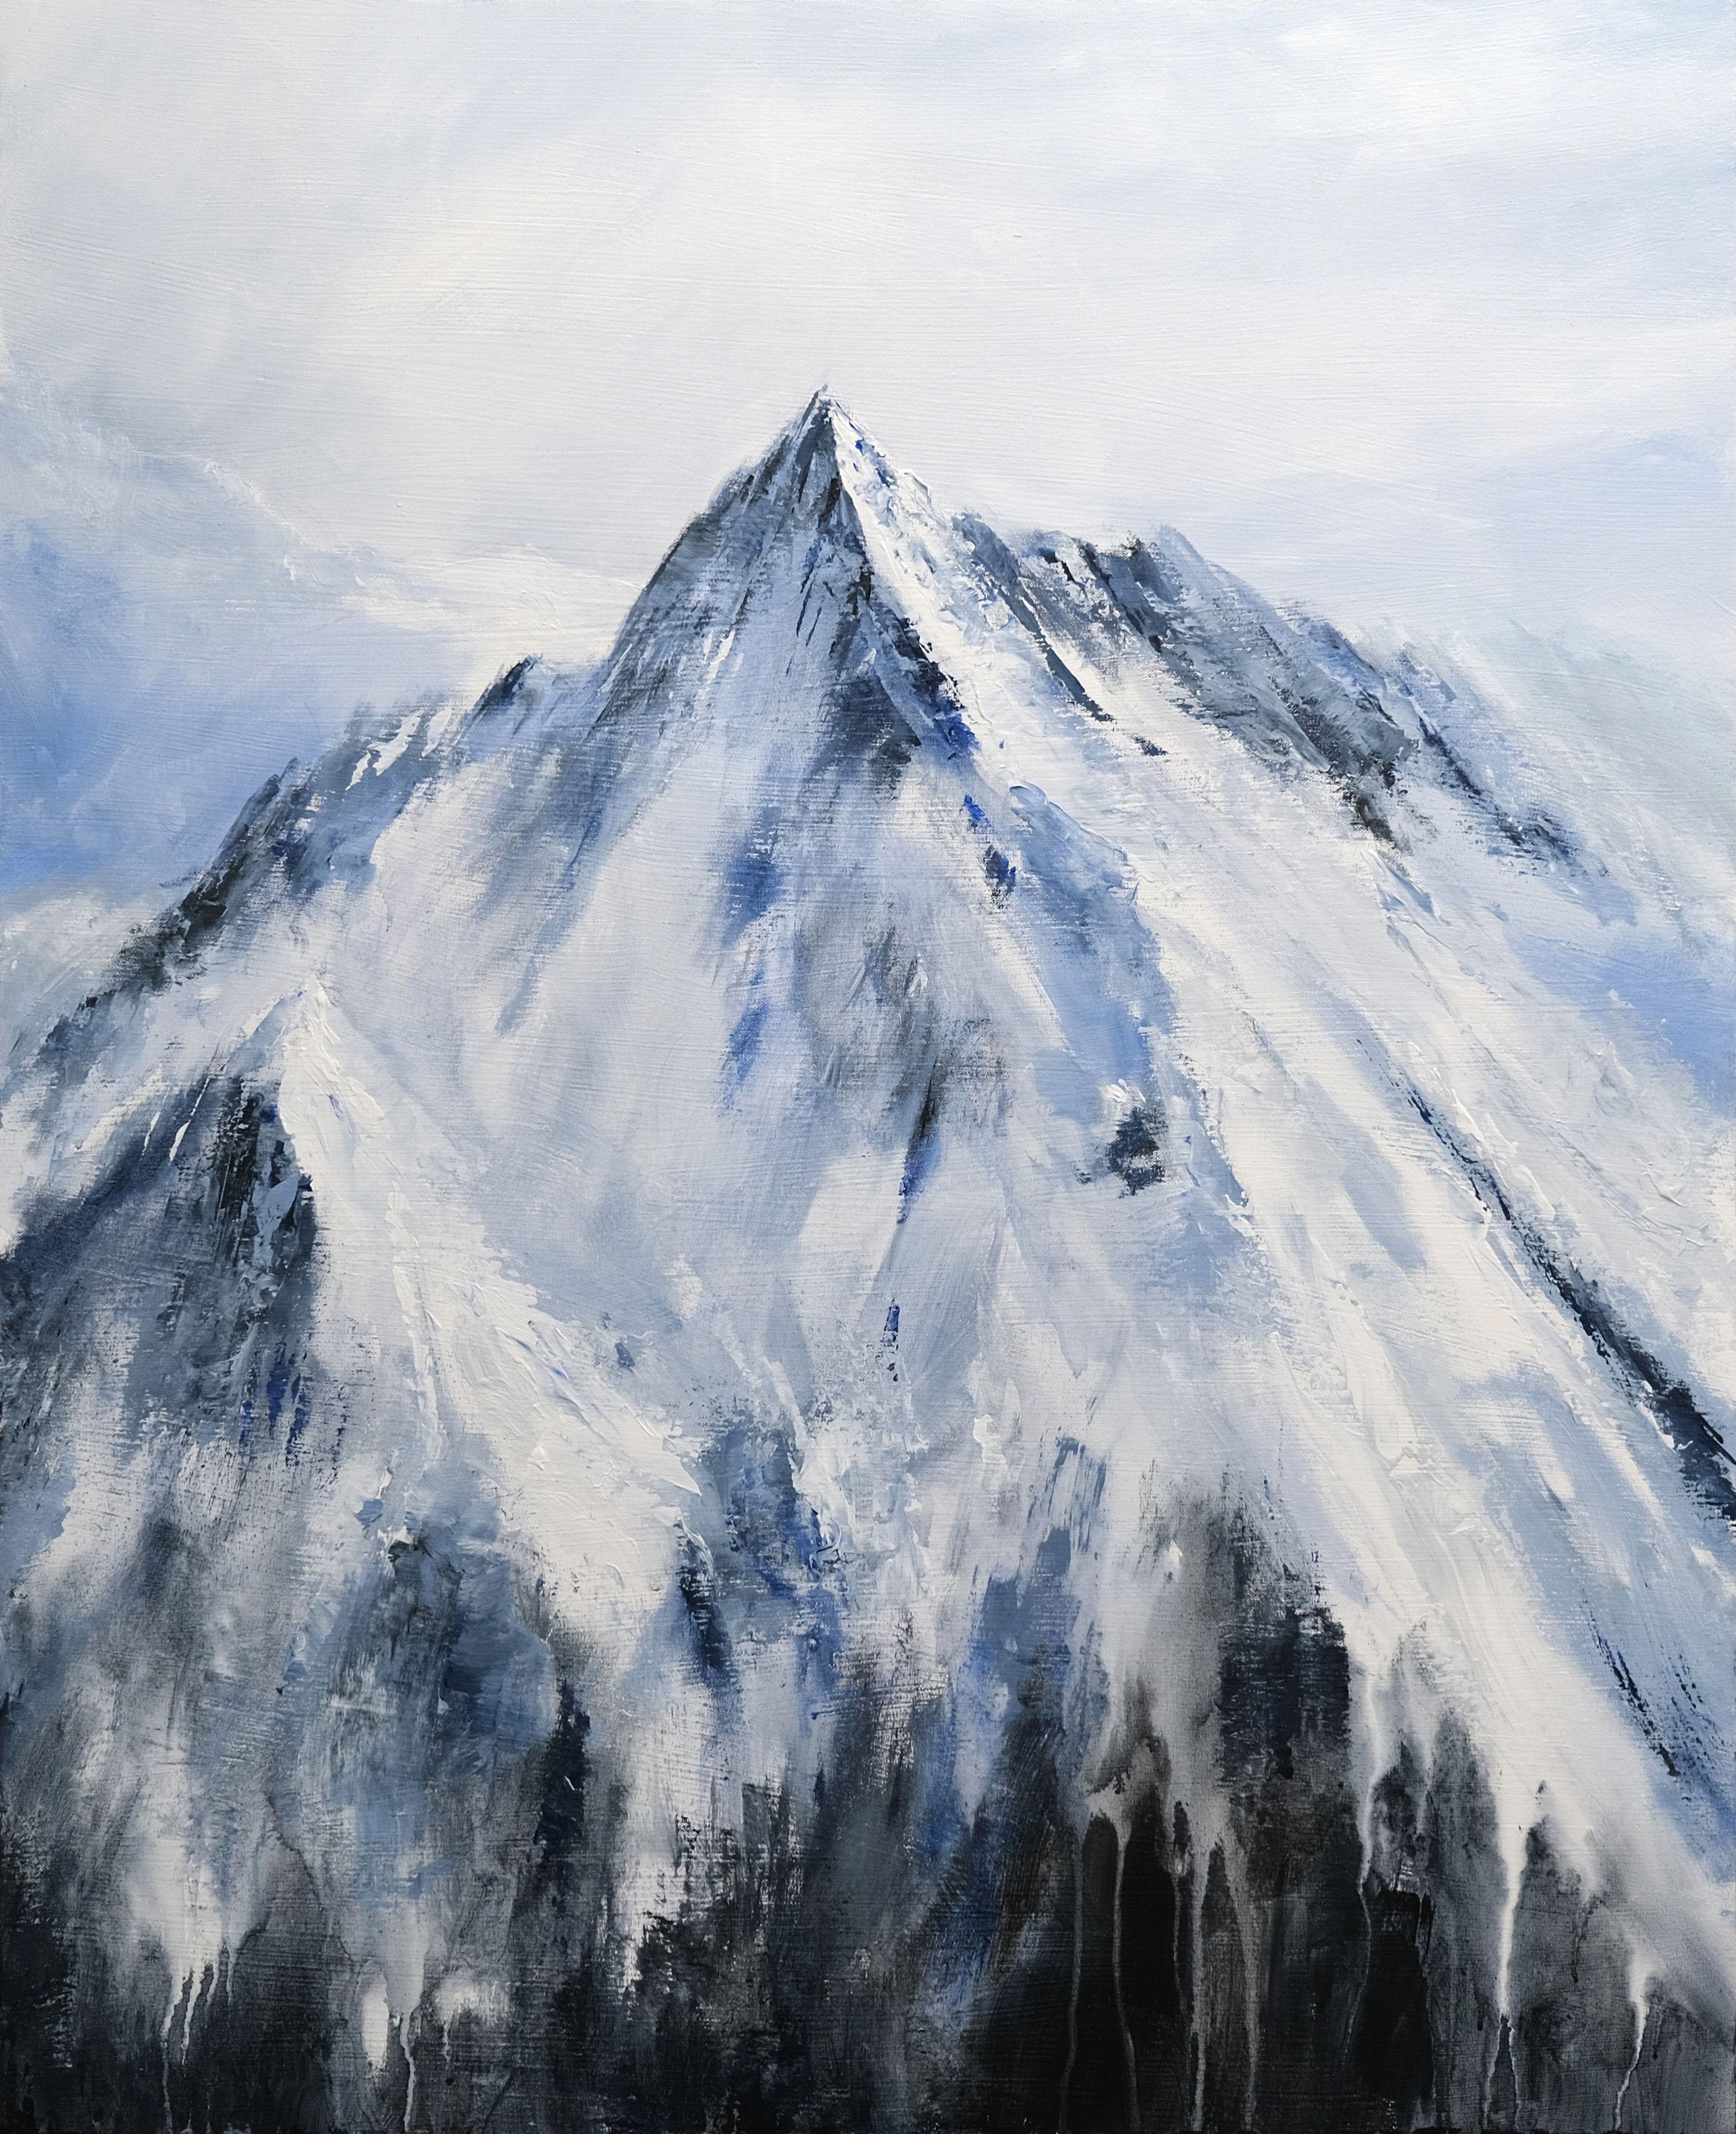 This painting is an imaginary landscape but inspired by the mountains in the Alps.  In this series of paintings, the artwork has a physical and abstract character seen up close with very loose brushstrokes and using different resources of acrylic